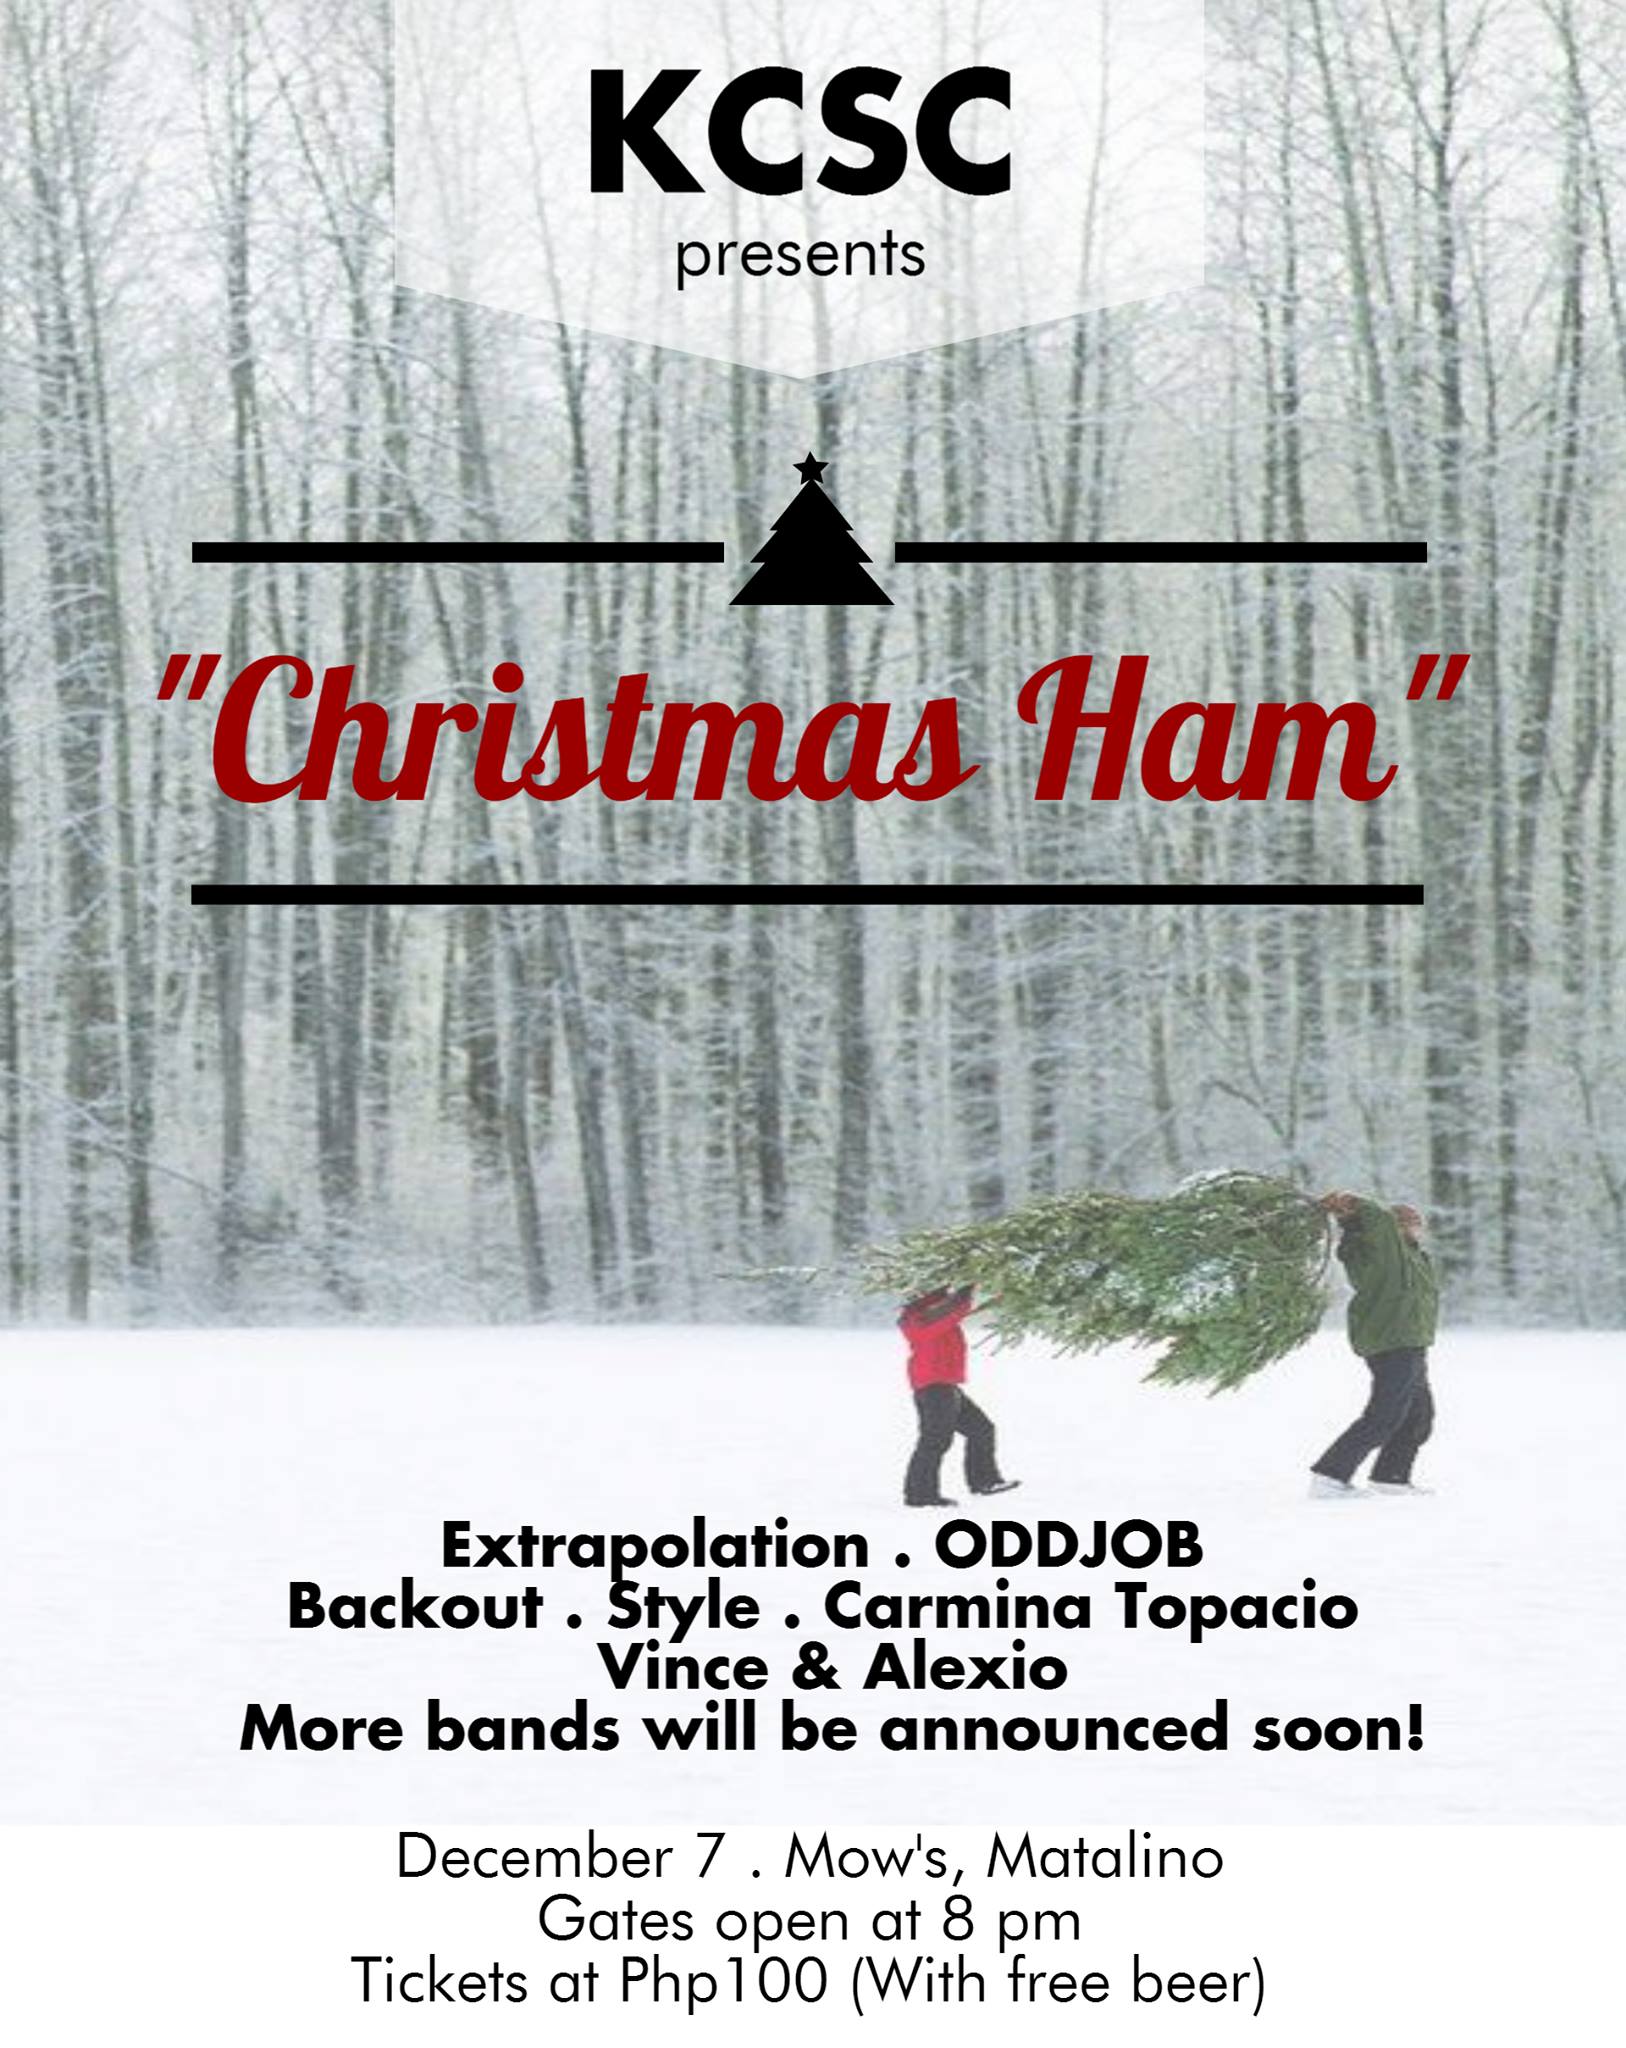 Christmas Ham clock Monday, December 7 at 8:00pm Next Week · 91°F / 75°F Chance of a Thunderstorm pin Show Map Mow's Kowloon House Basement, 20 Matalino St., 1100 Quezon City, Philippines Kalayaan Student Council presents CHRISTMAS HAM: The Official Sem Ender Party of Kalayaan College featuring performances by Extrapolation ODDJOB BackOut Carmina Topacio Vince & Alexio Style Stay tuned for more bands! Mow's. 7 Decmeber. Gates open at 8! Tickets at Php100 (with a free drink!)